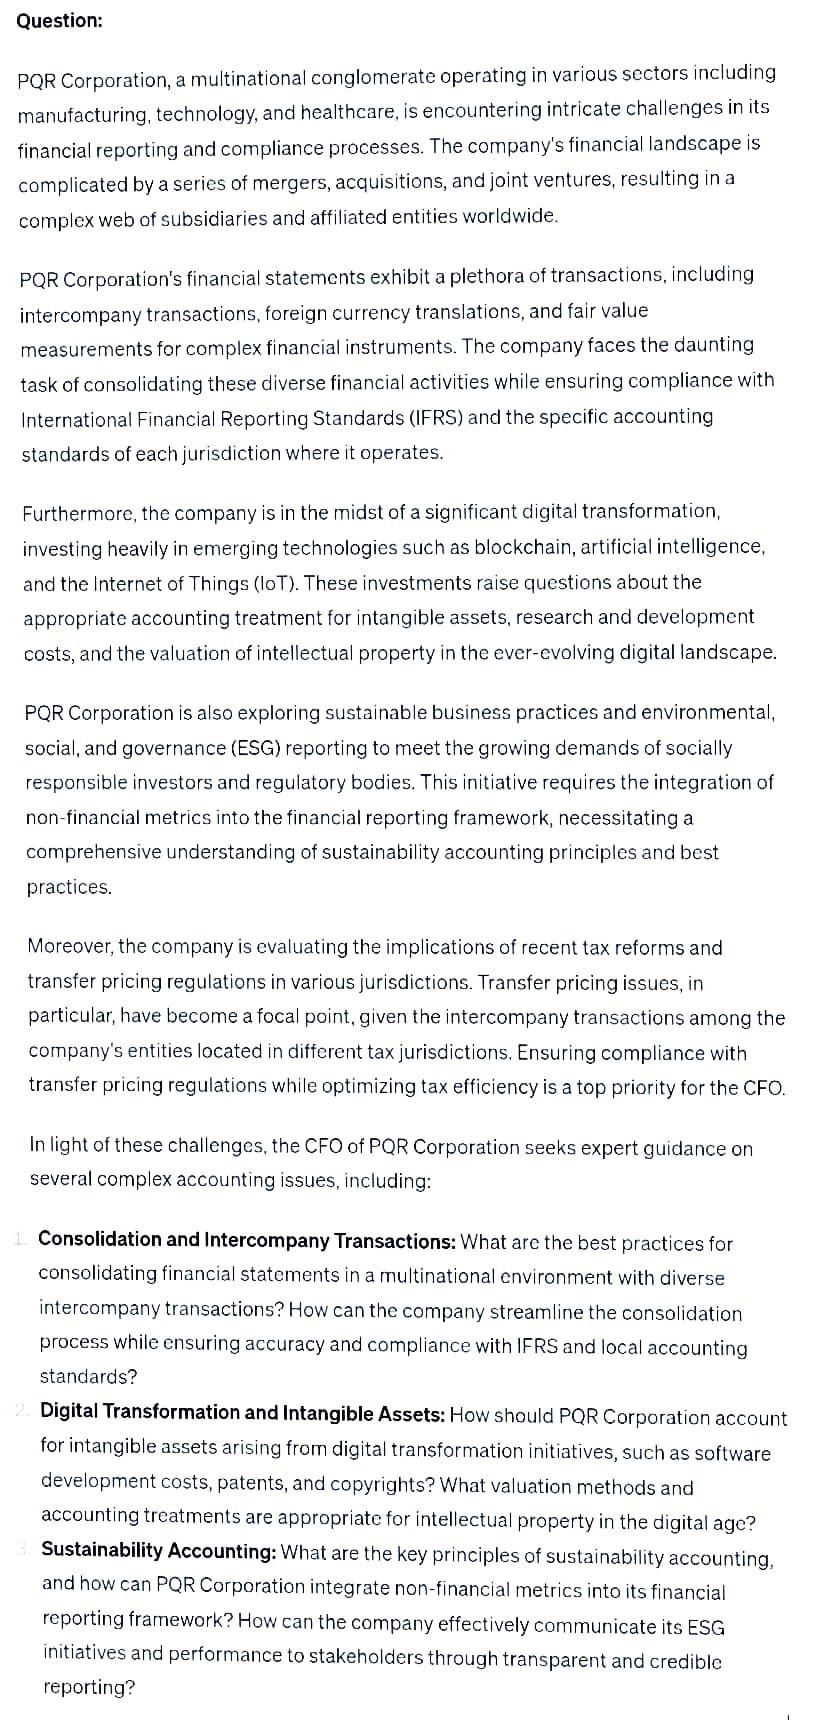 Question: PQR Corporation, a multinational conglomerate operating in various sectors including manufacturing,